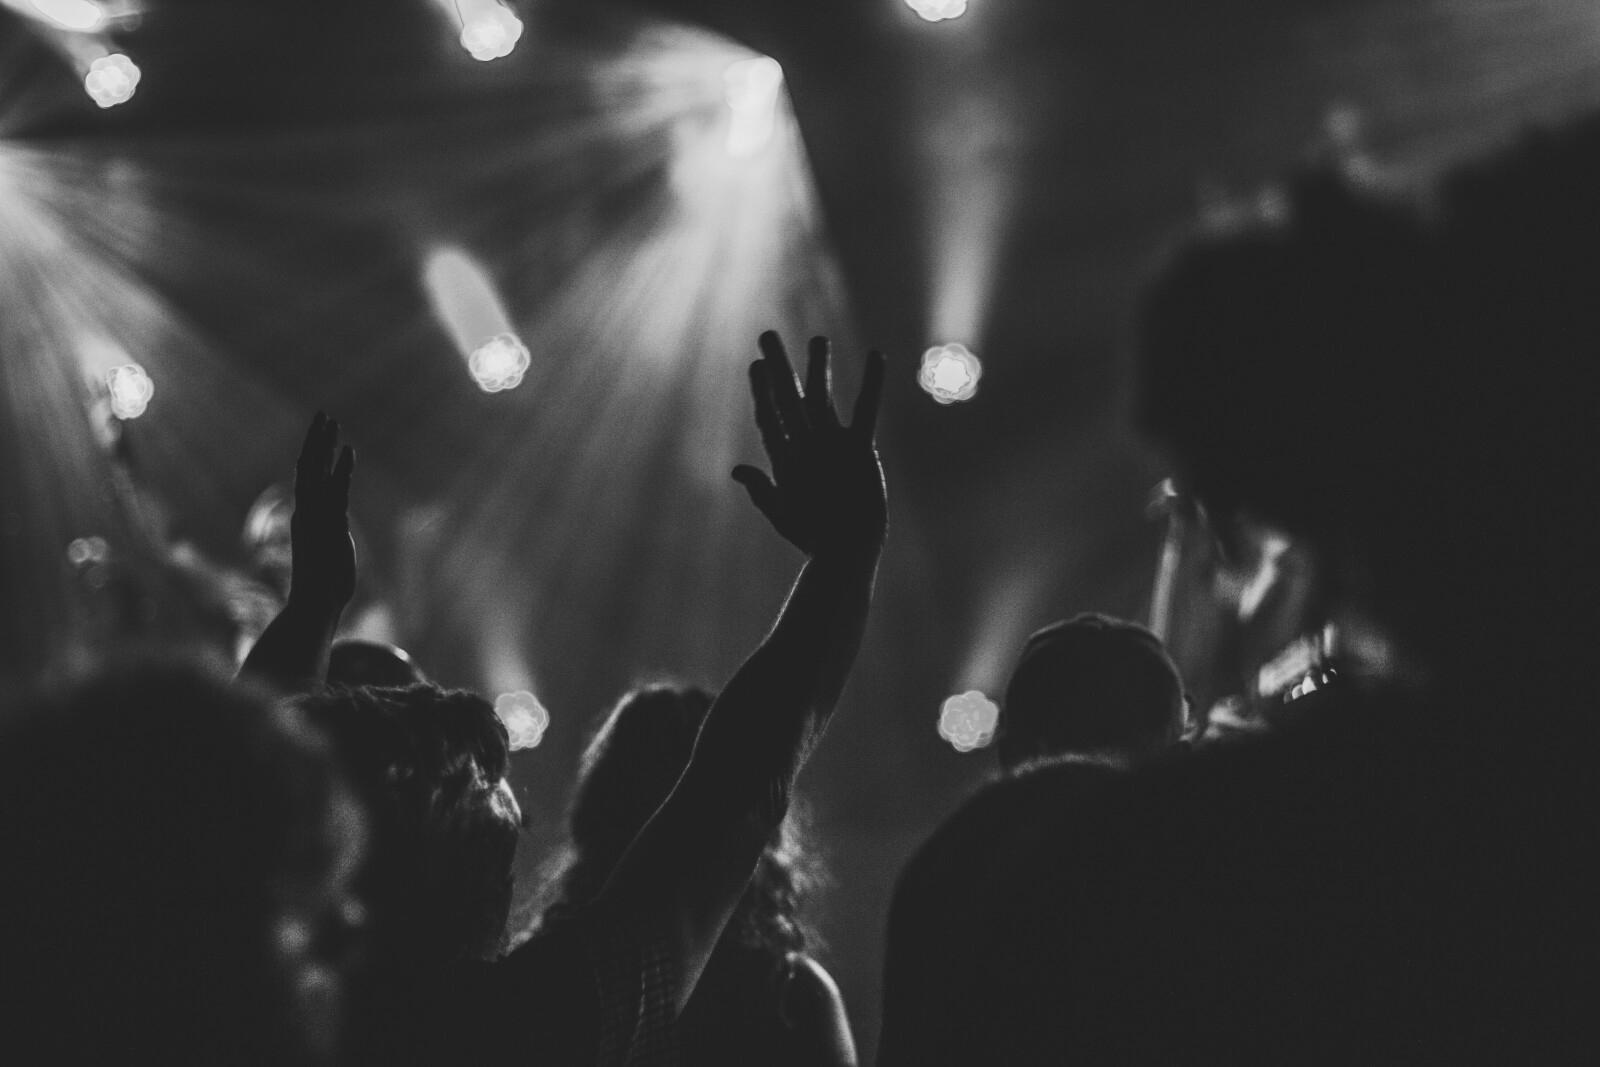 Image showing church members raising their hands up during worship service